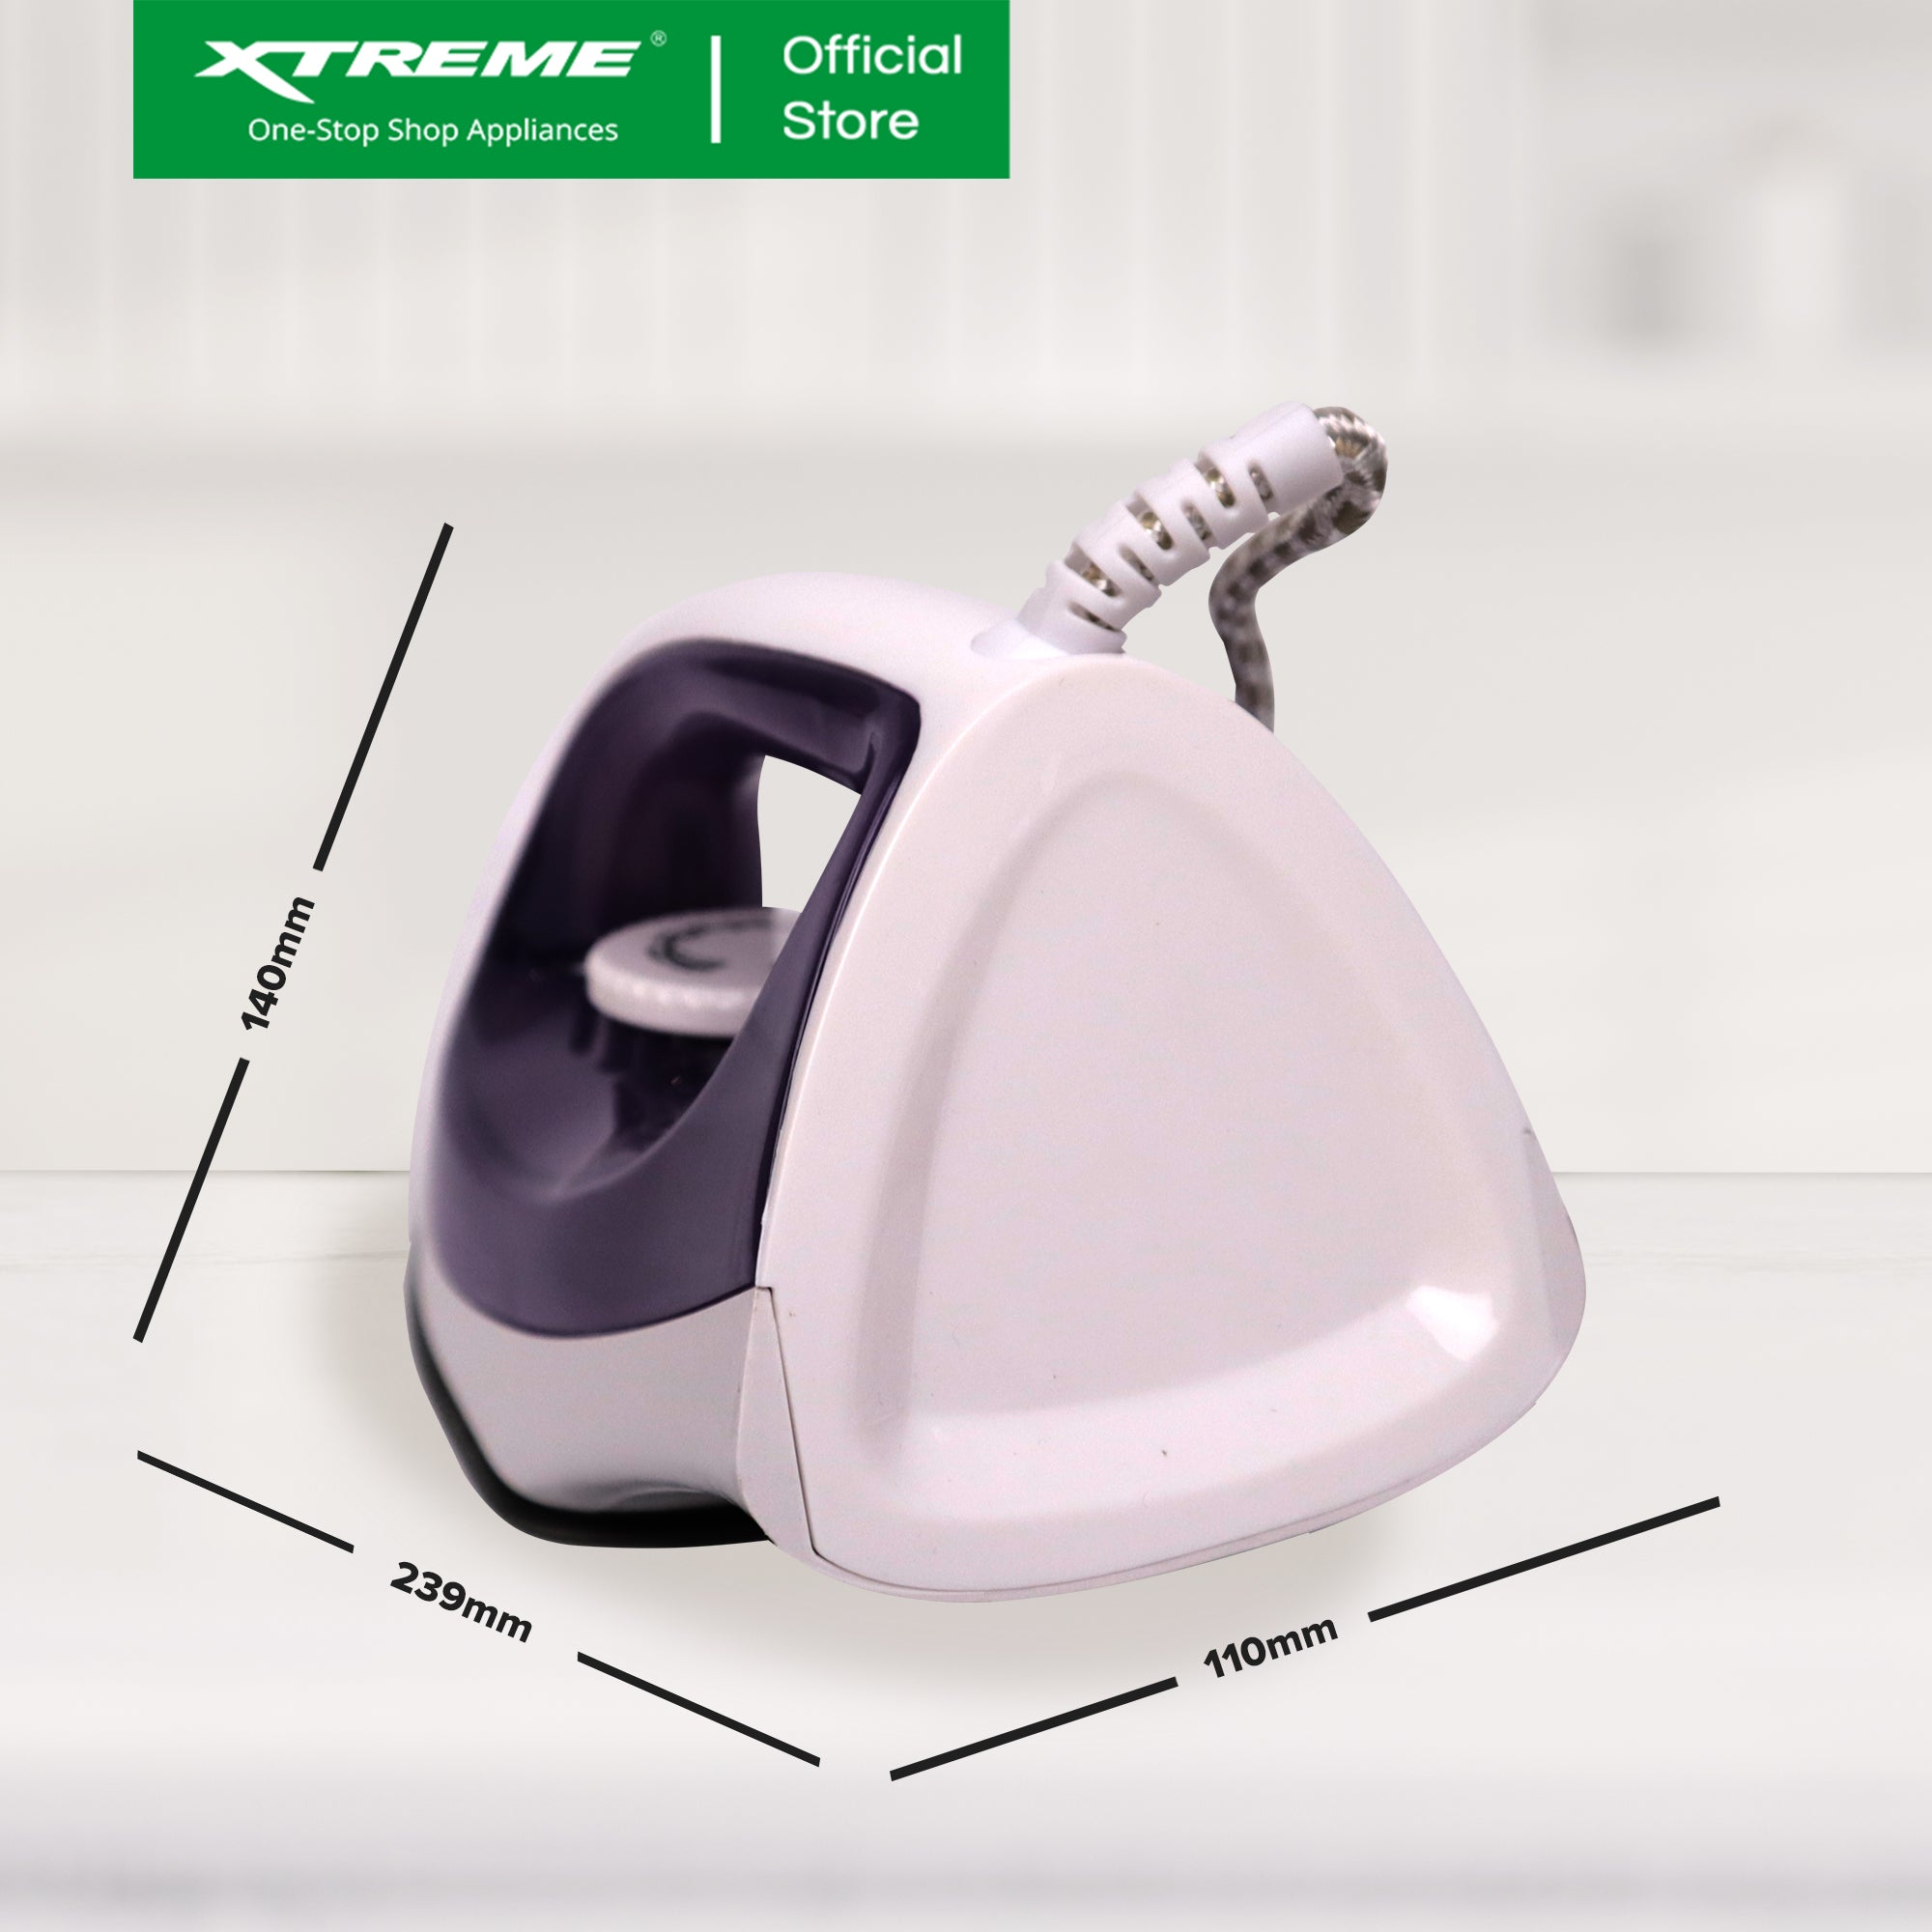 XTREME HOME Dry Iron w/ Soleplate Overheat Protection & Indicator Light (Violet) | XH-IRONDRYVIOLET